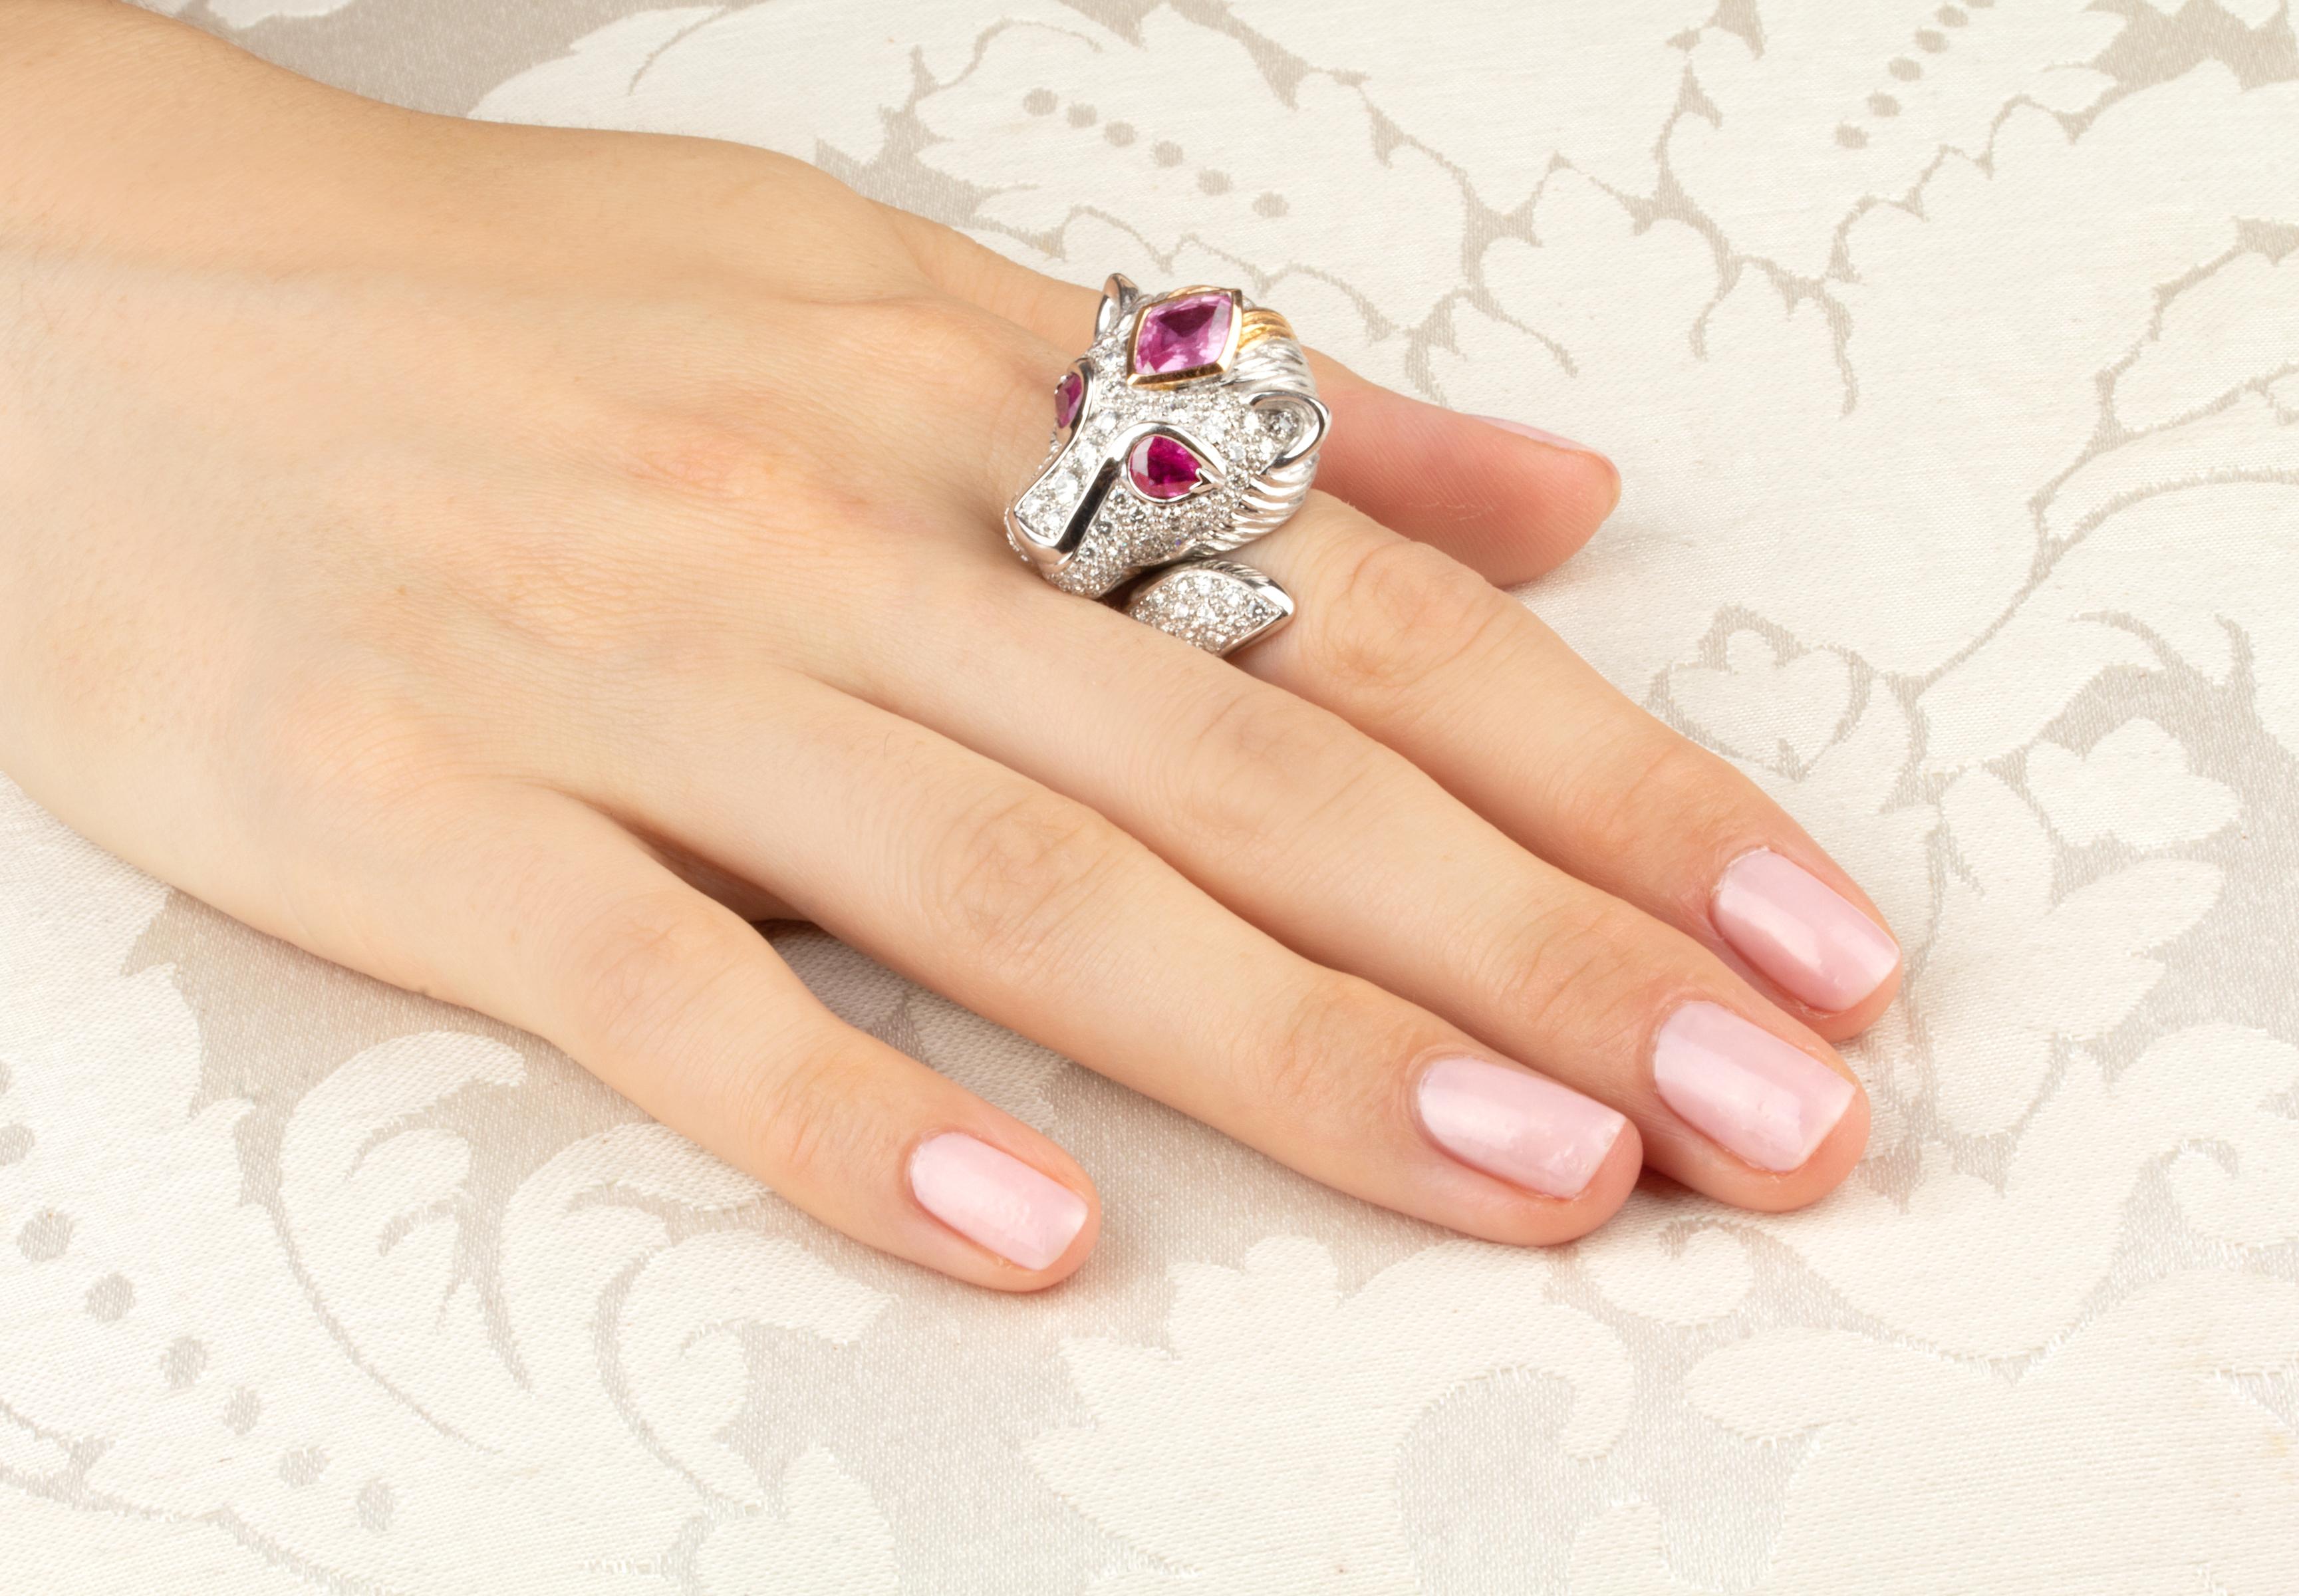 The zodiac Leo ring features faceted pink sapphires for a total of 2.06 carats (eyes and corona). The design is complete with 1.94 carats of diamonds of top quality (F/G-VVS).
The ring is one-of-a-kind. It was handmade in our own workshop in Italy